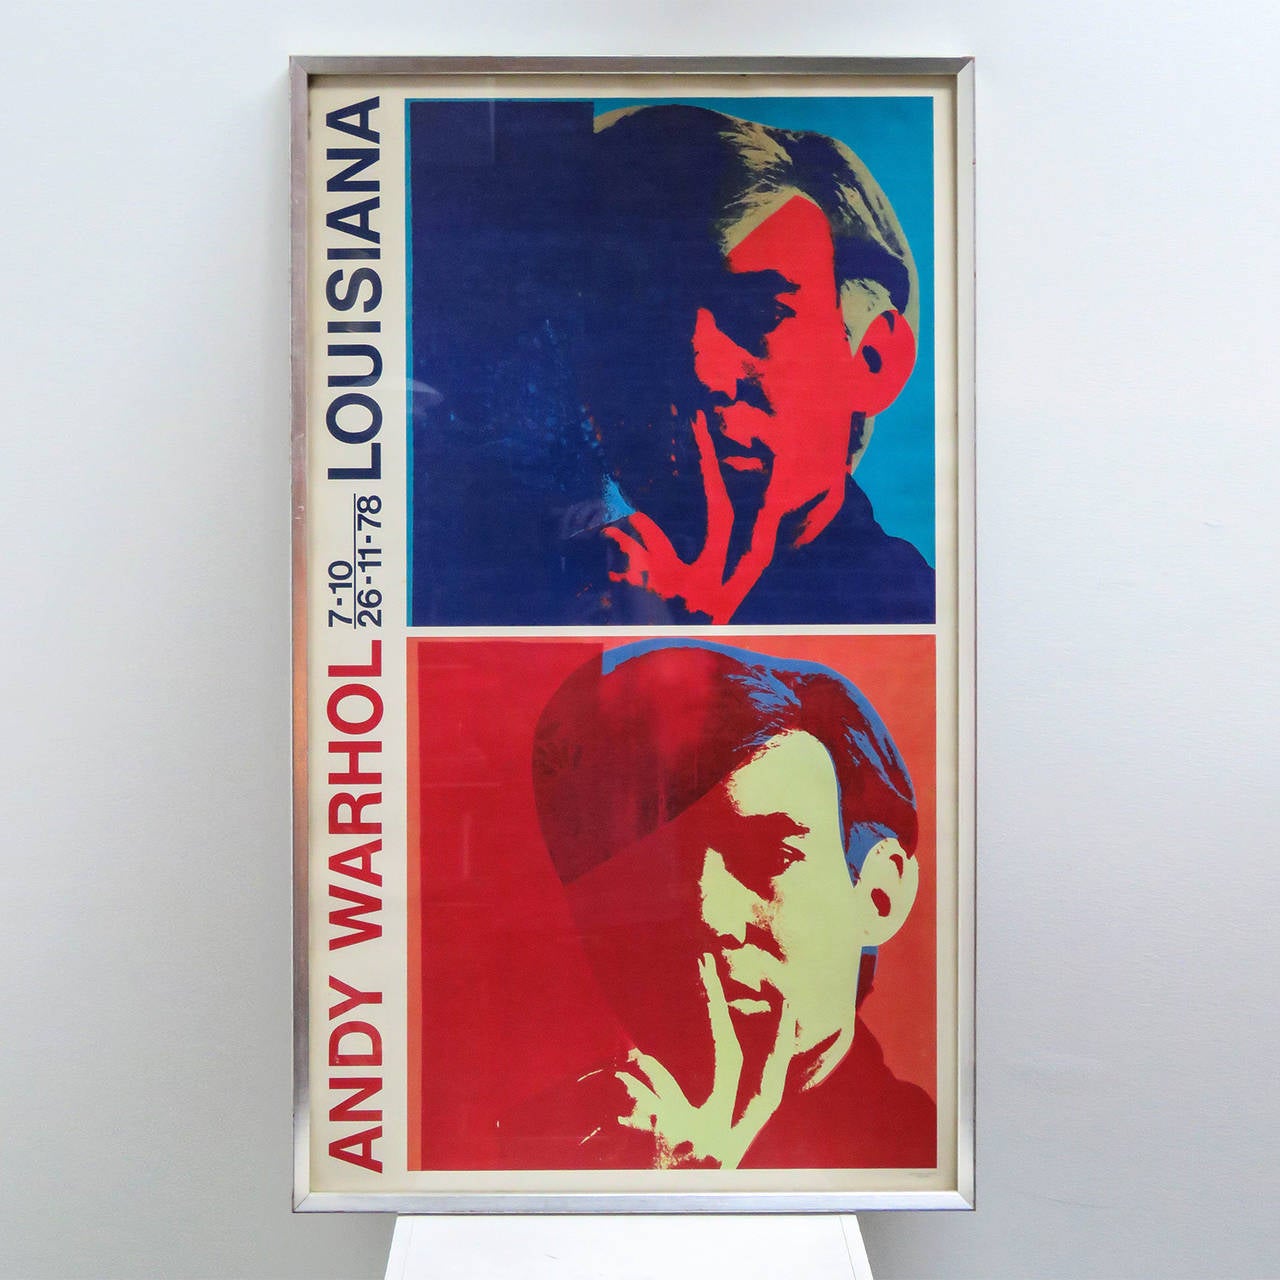 Andy Warhol exhibition poster from Louisiana Museum Denmark in 1978, off-set print by Grafodan Offset Værløse behind glass.  Featuring his iconic Self-Portraits.